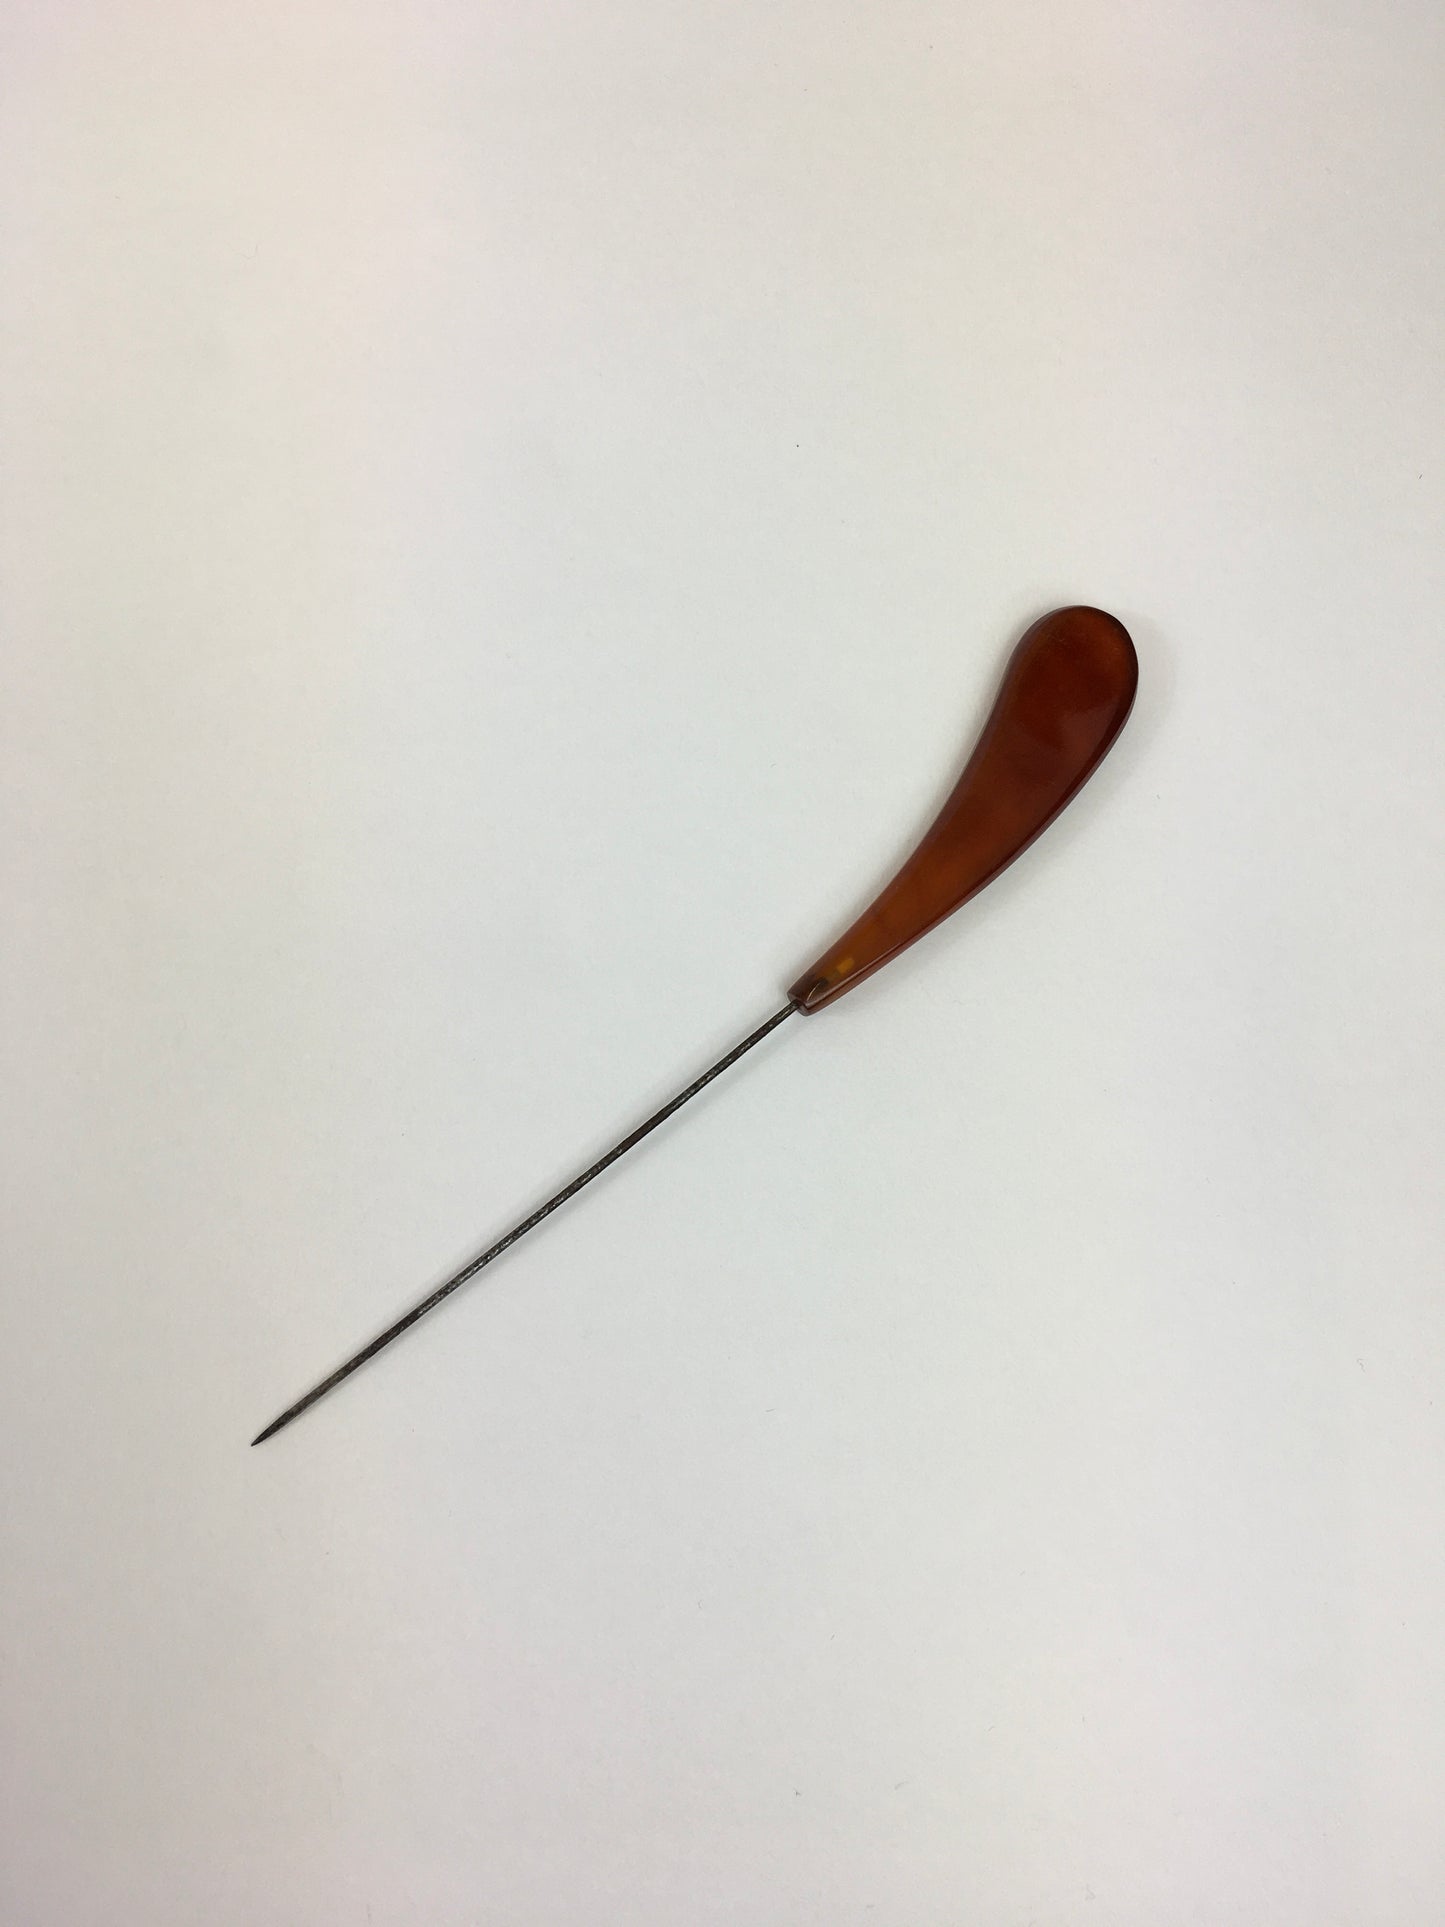 Original 1940’s Hat Pin - In A Lovely Warm Amber Colouring